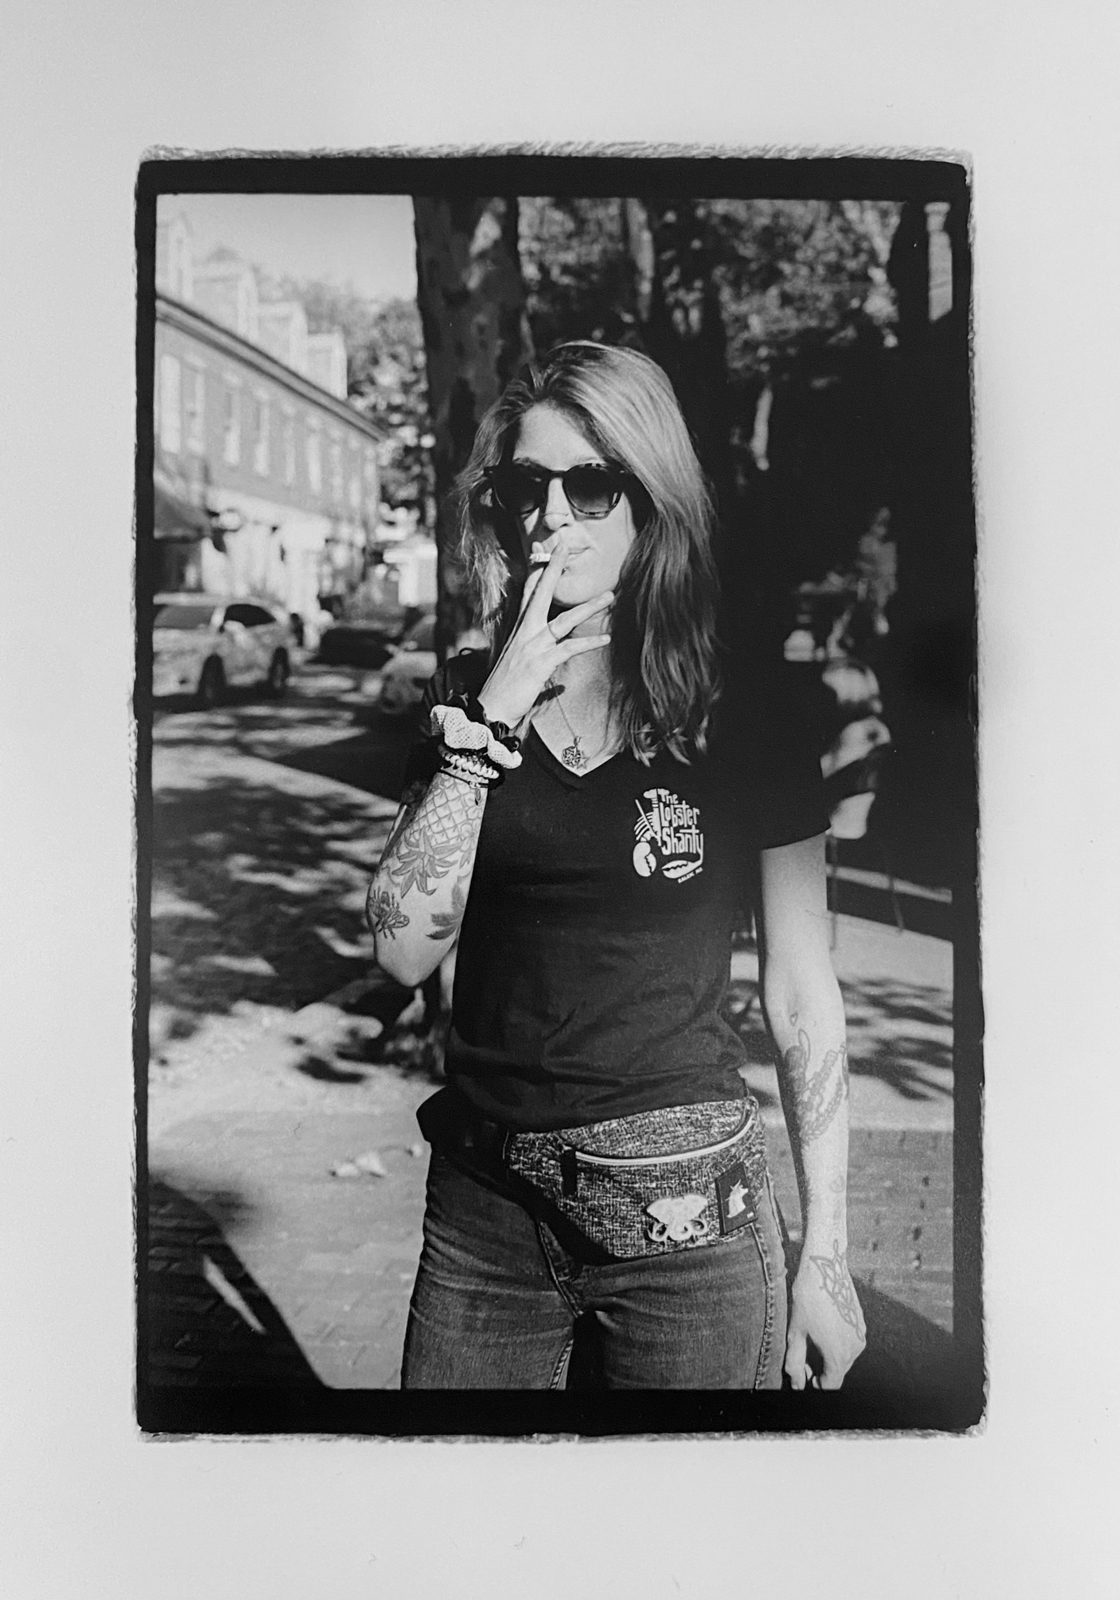 “early-for-work”-waitress shot on ILFORD HP5 plus film by Jessica Martinea